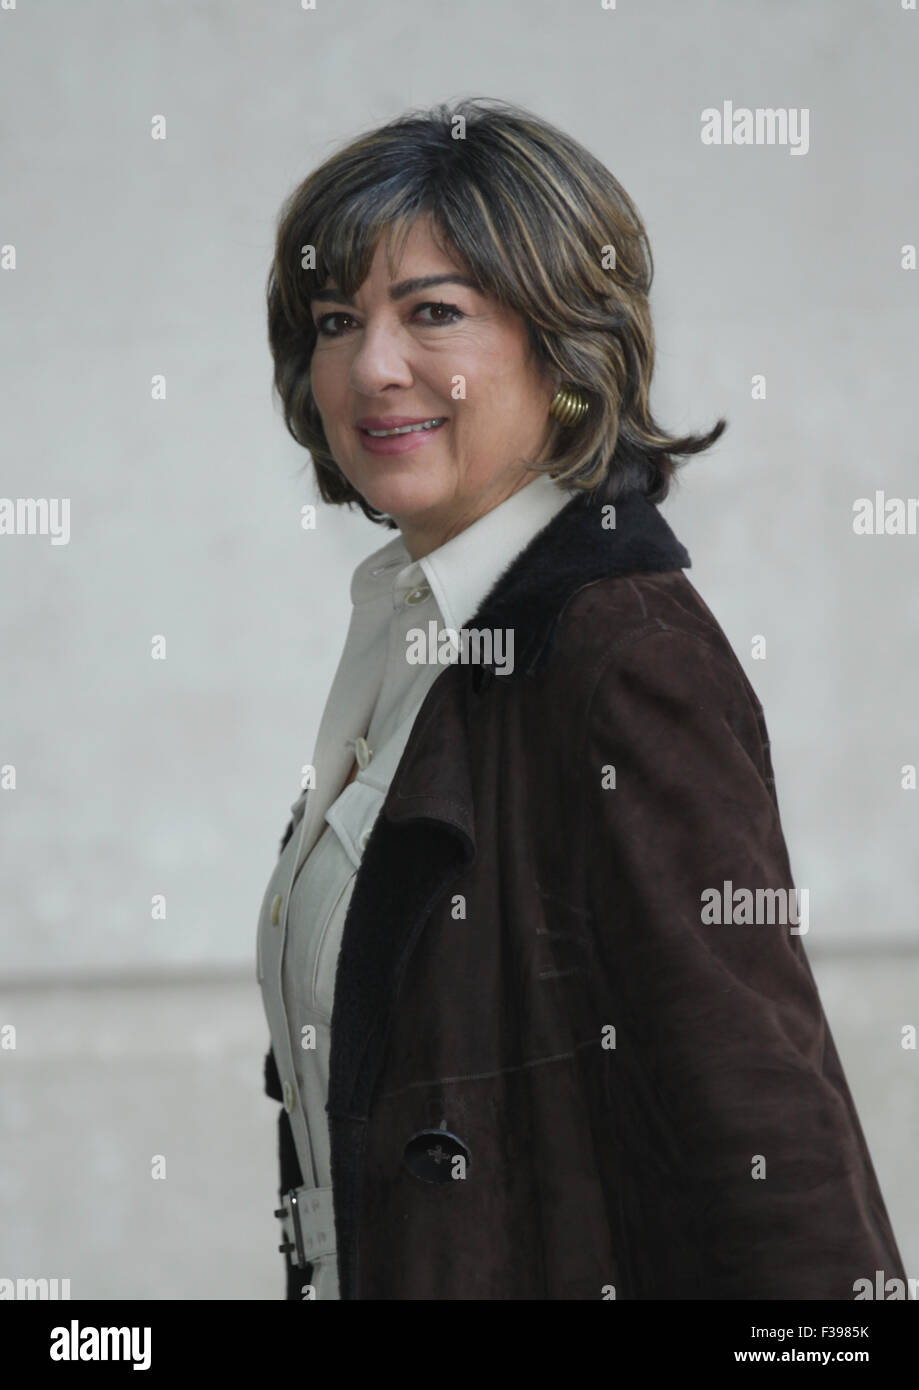 London, UK, 6th Sep 2015: Broadcaster Christiane Amanpour seen at the BBC Broadcasting House for the Andrew Marr Show in London Stock Photo